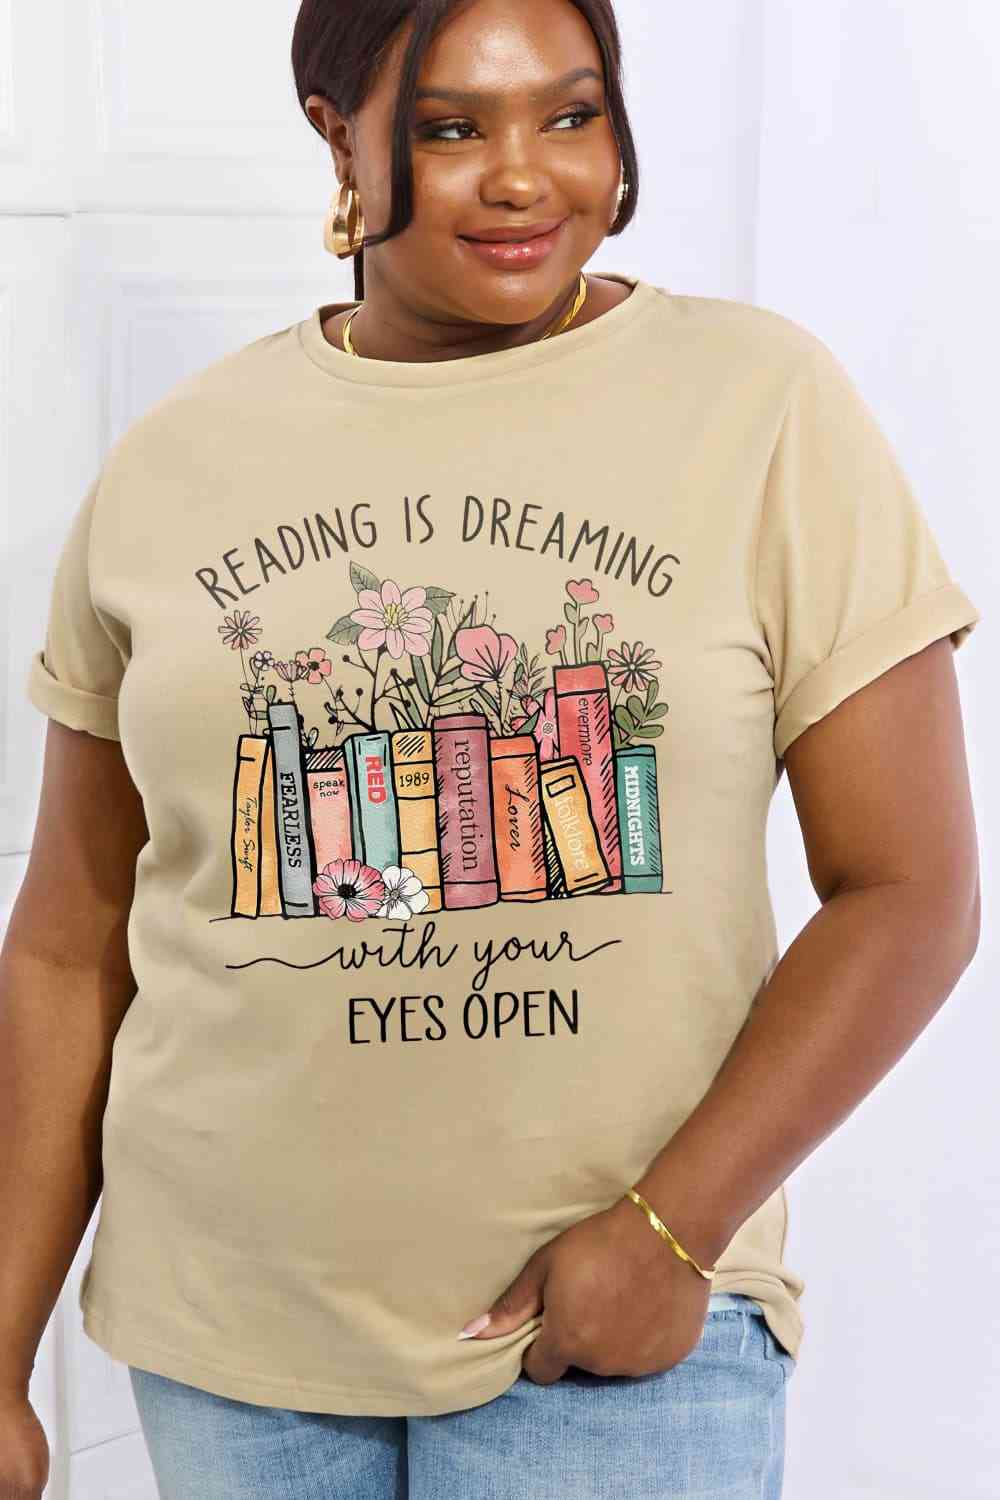 READING IS DREAMING WITH YOUR EYES OPEN Graphic Cotton Tee - T-Shirts - Shirts & Tops - 4 - 2024